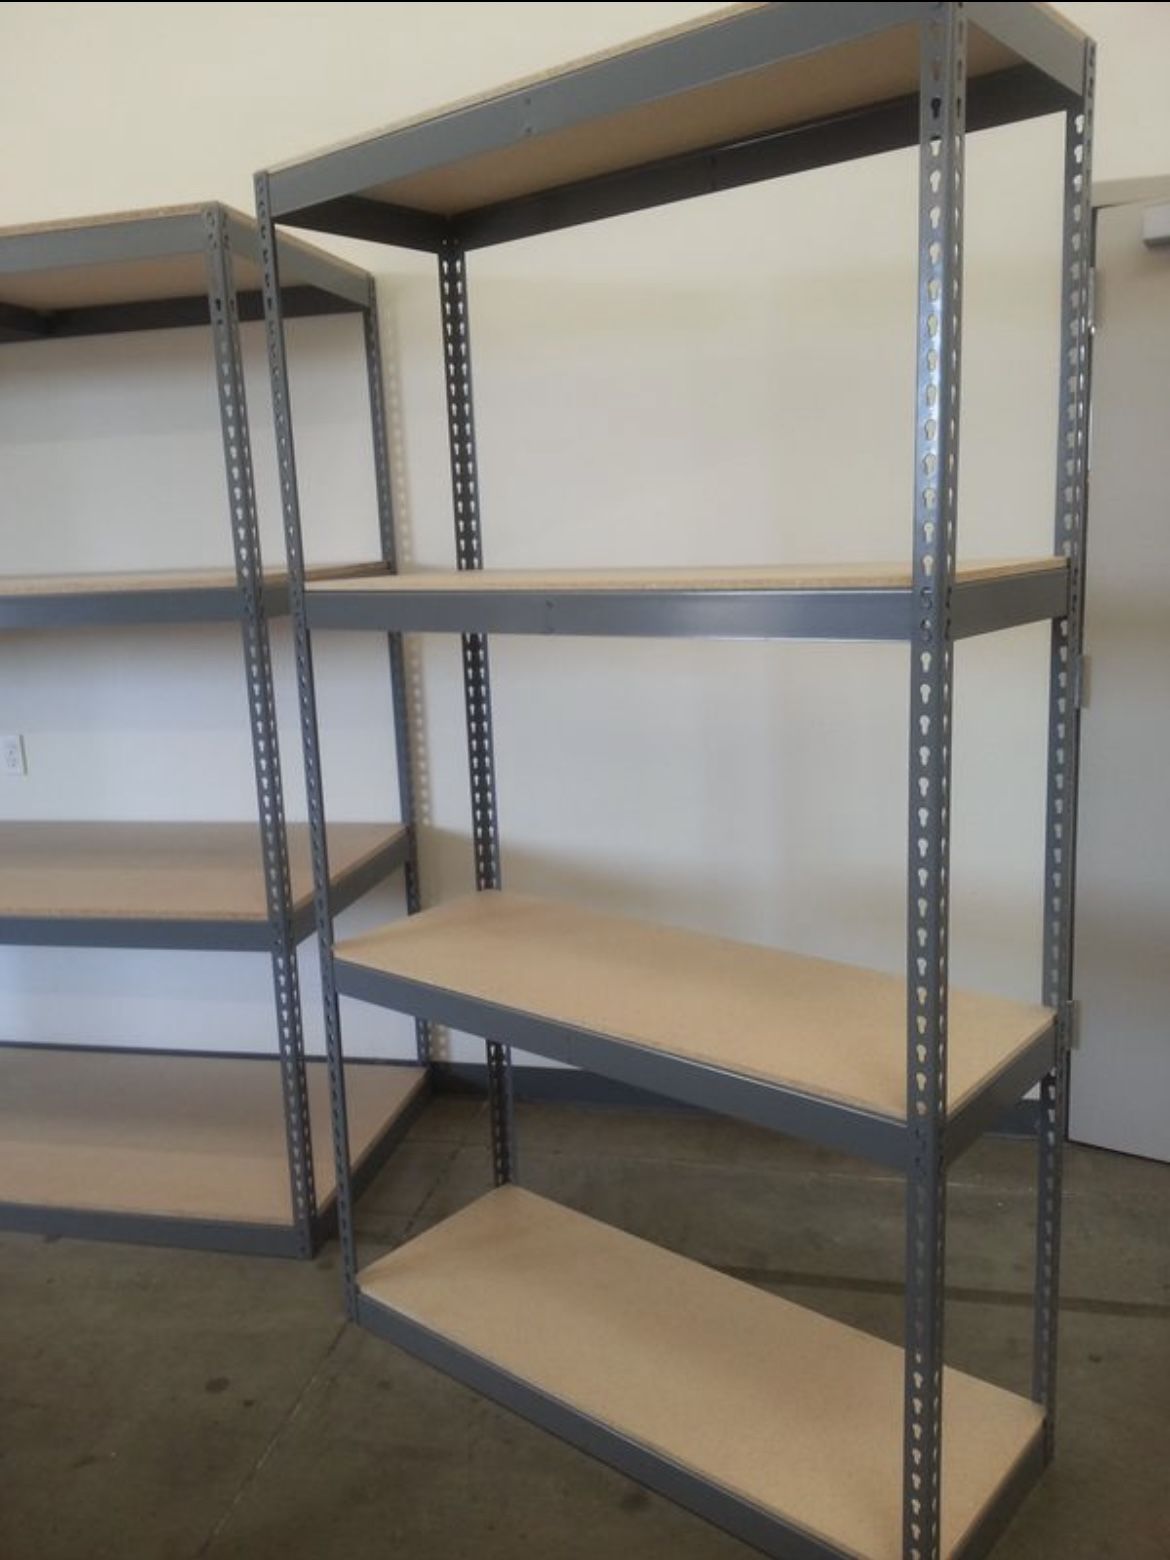 Shelving 48 in W x 18 in D Industrial Boltless Warehouse Storage Racks Similar to Uline Grainger Global McMaster Carr Delivery Available